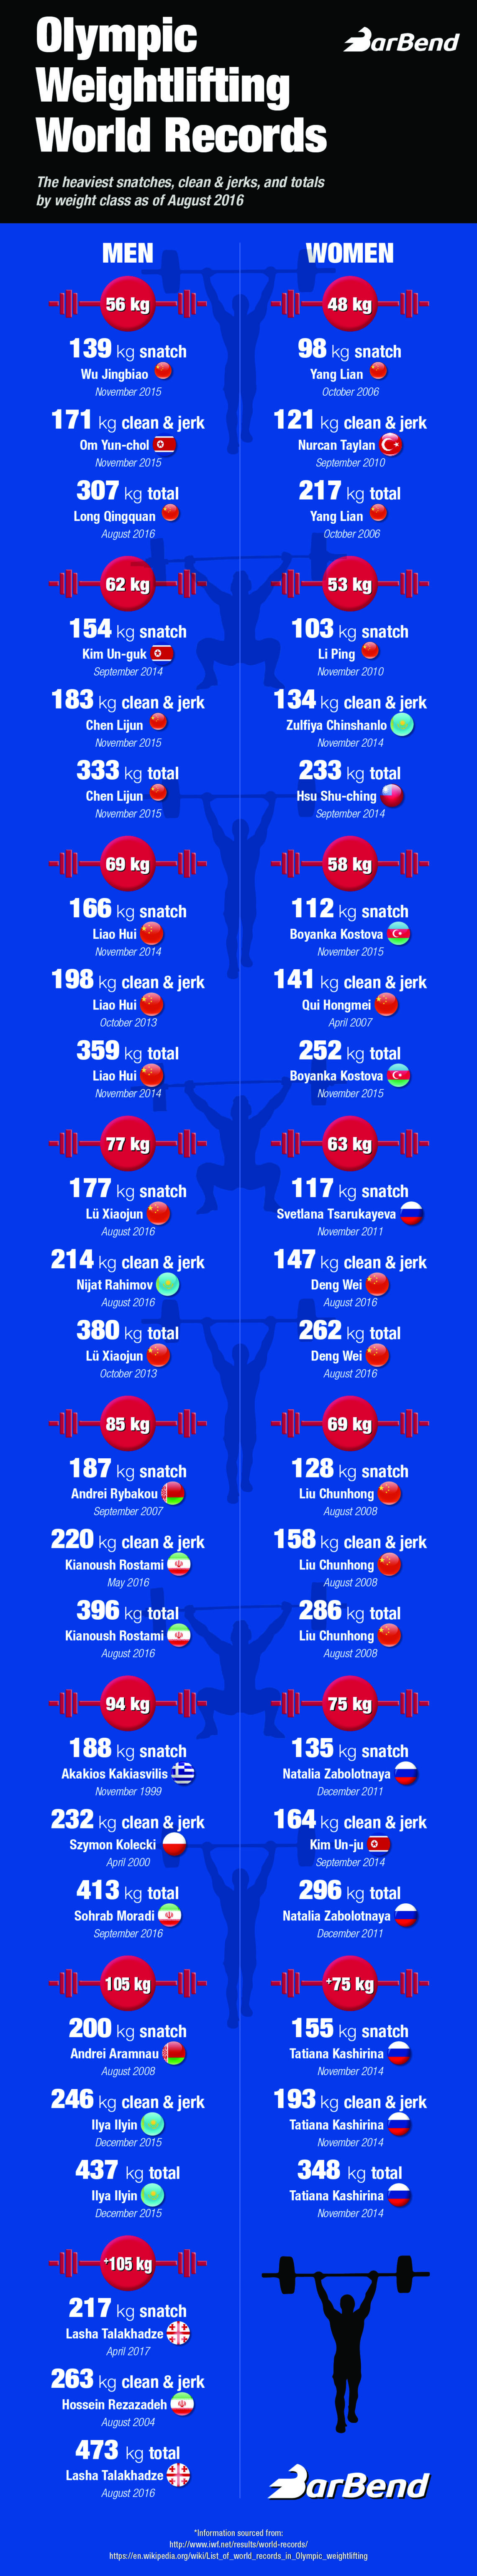 Olympic Weightlifting World Records 2 1140x6158 